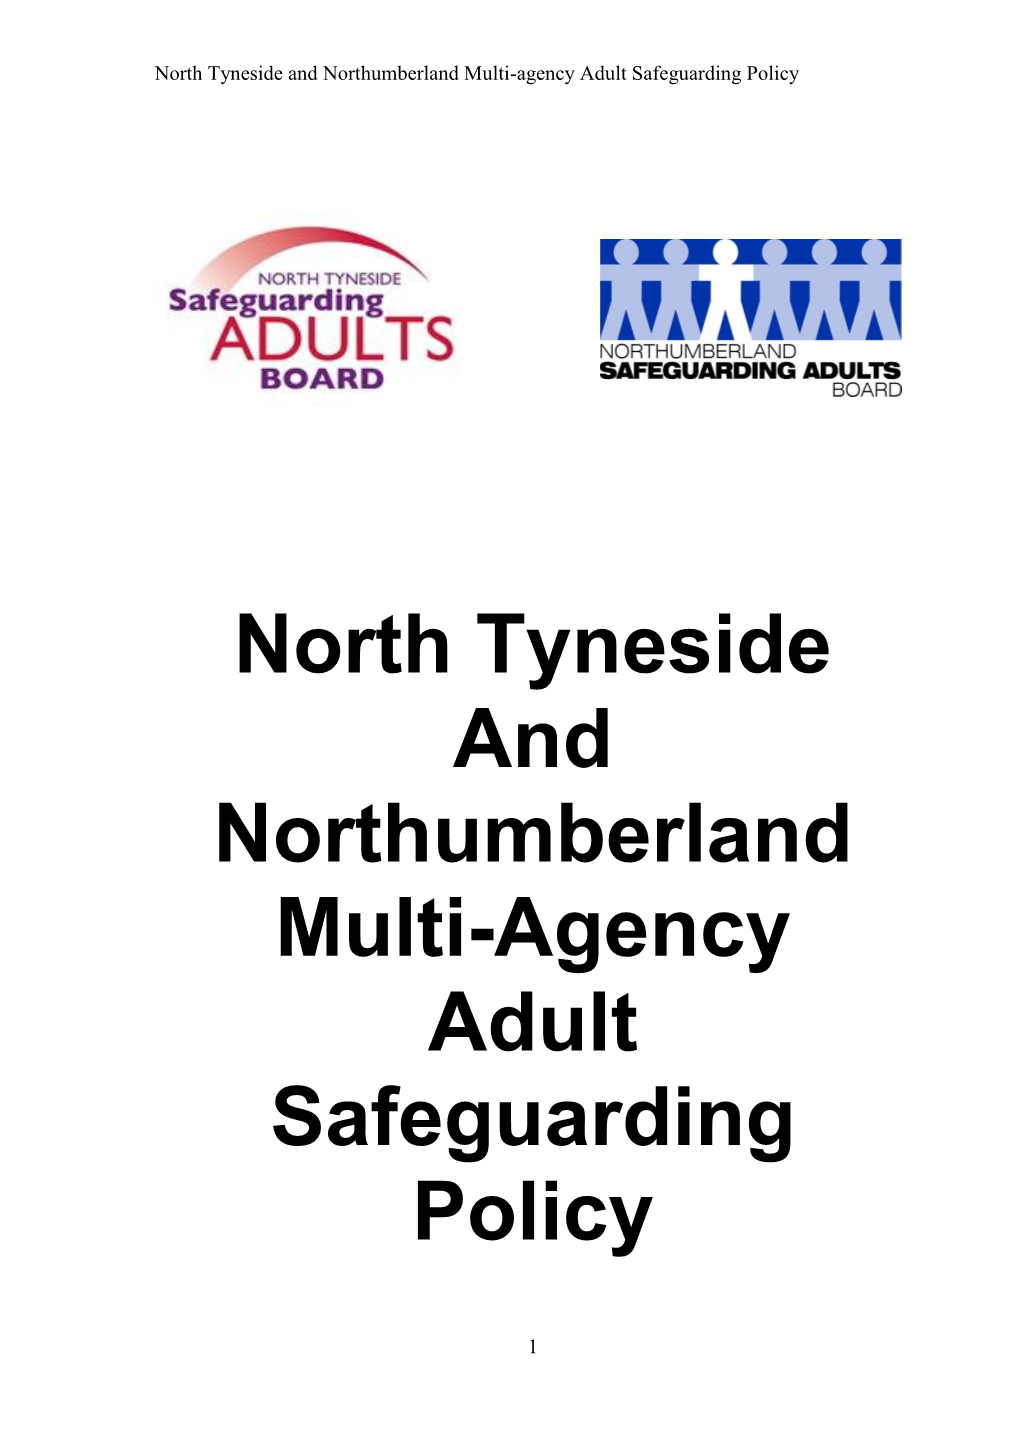 North Tyneside and Northumberland Joint Safeguarding Adults Policy